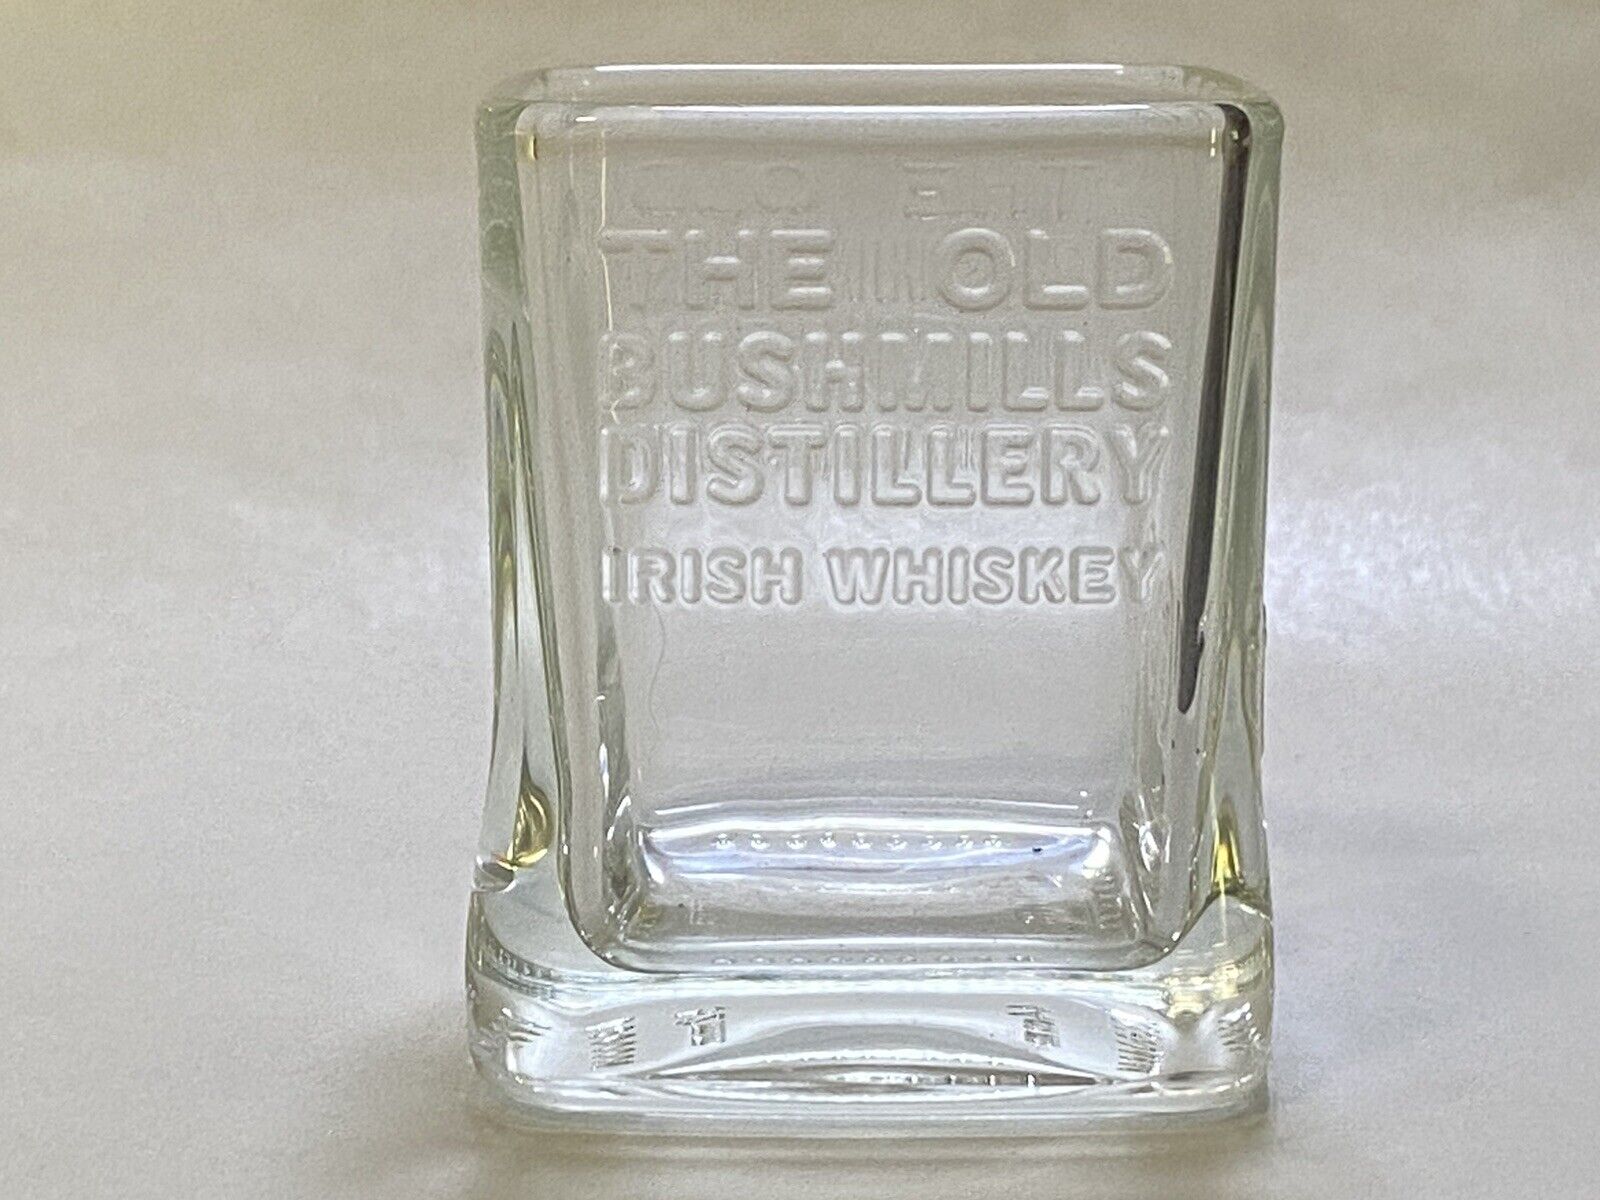 NEW The Old Bushmills Distillery Irish Whiskey1608 Square ShotGlass S/H INCLUDED